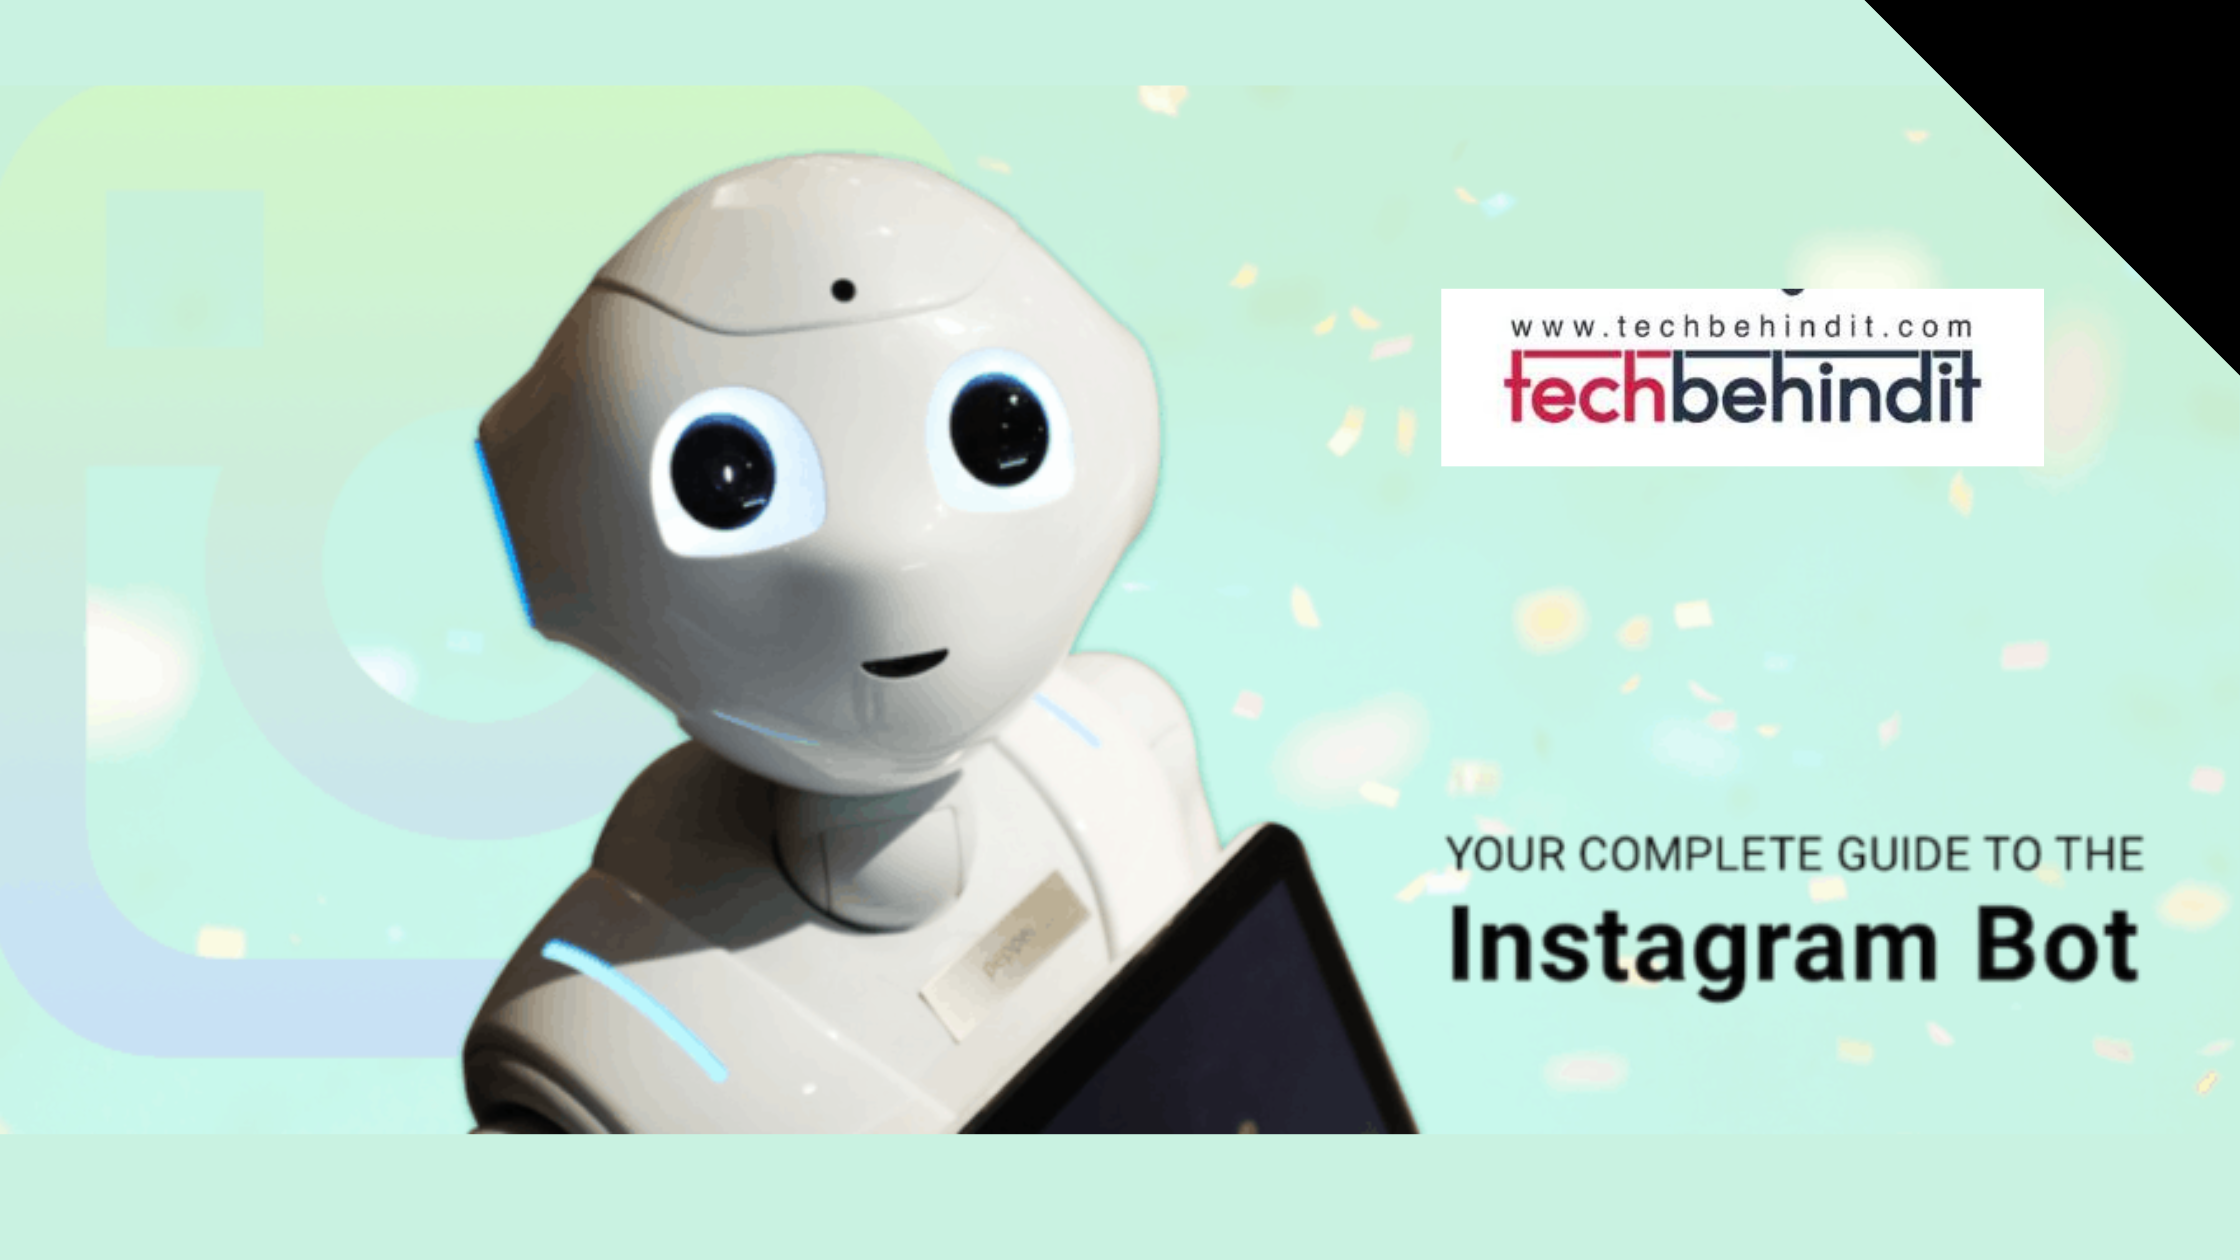 Instagram Follow Bot Guide: How to Use Instagram Bots Responsibly